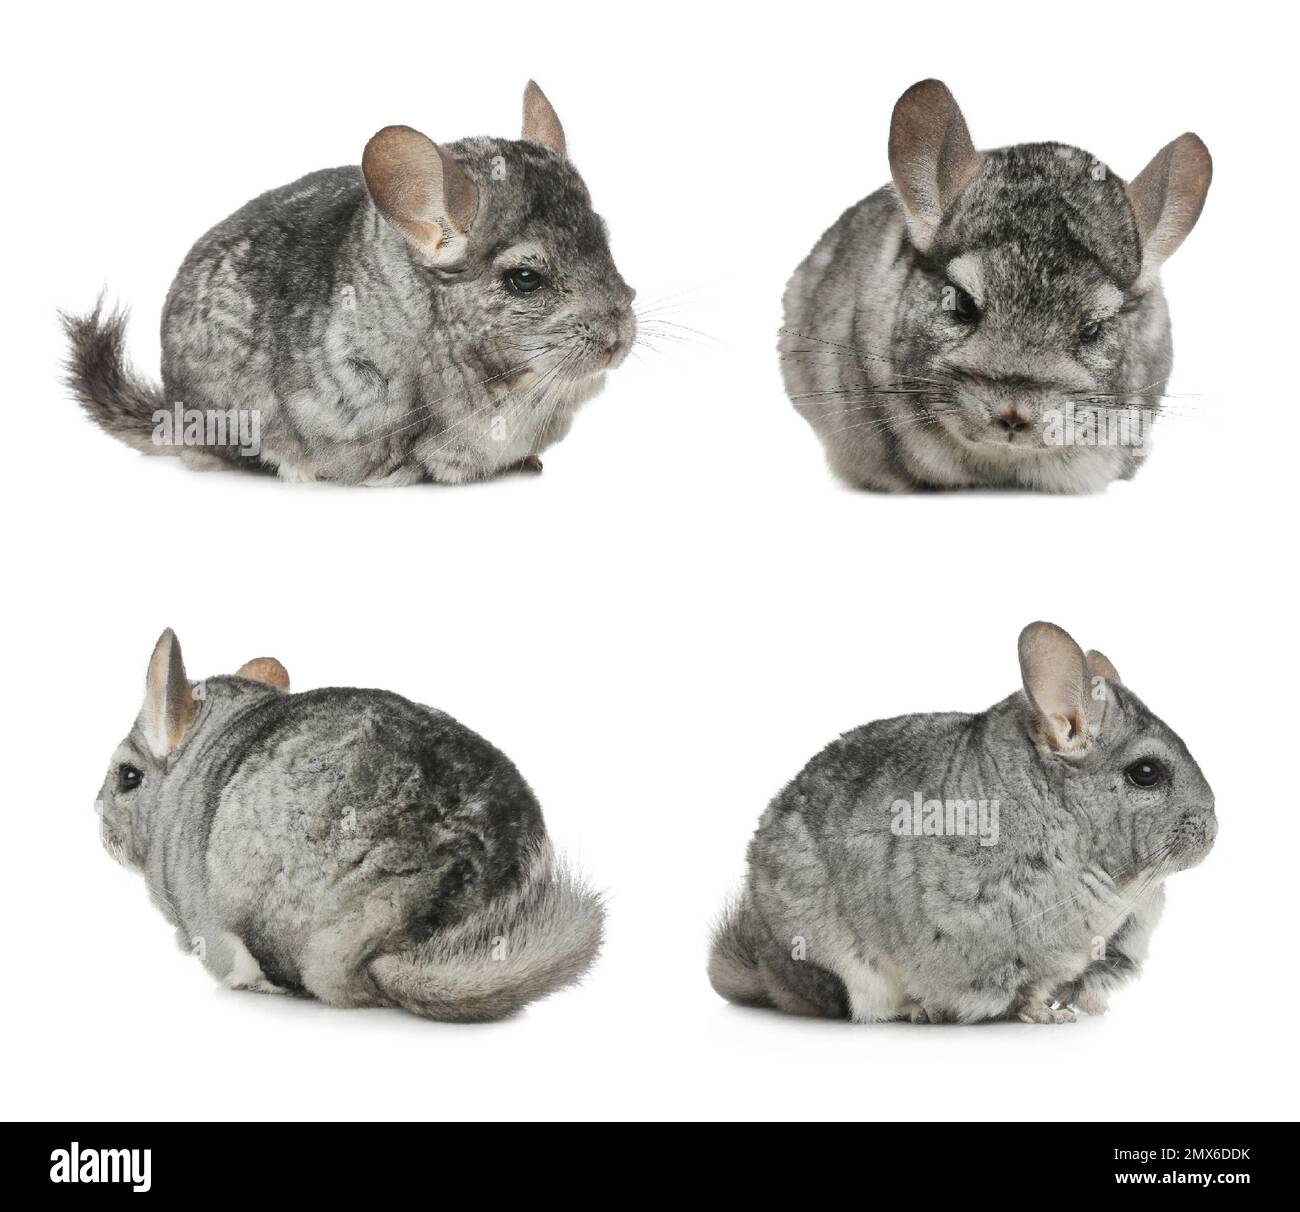 Collage with cute grey chinchillas on white background Stock Photo